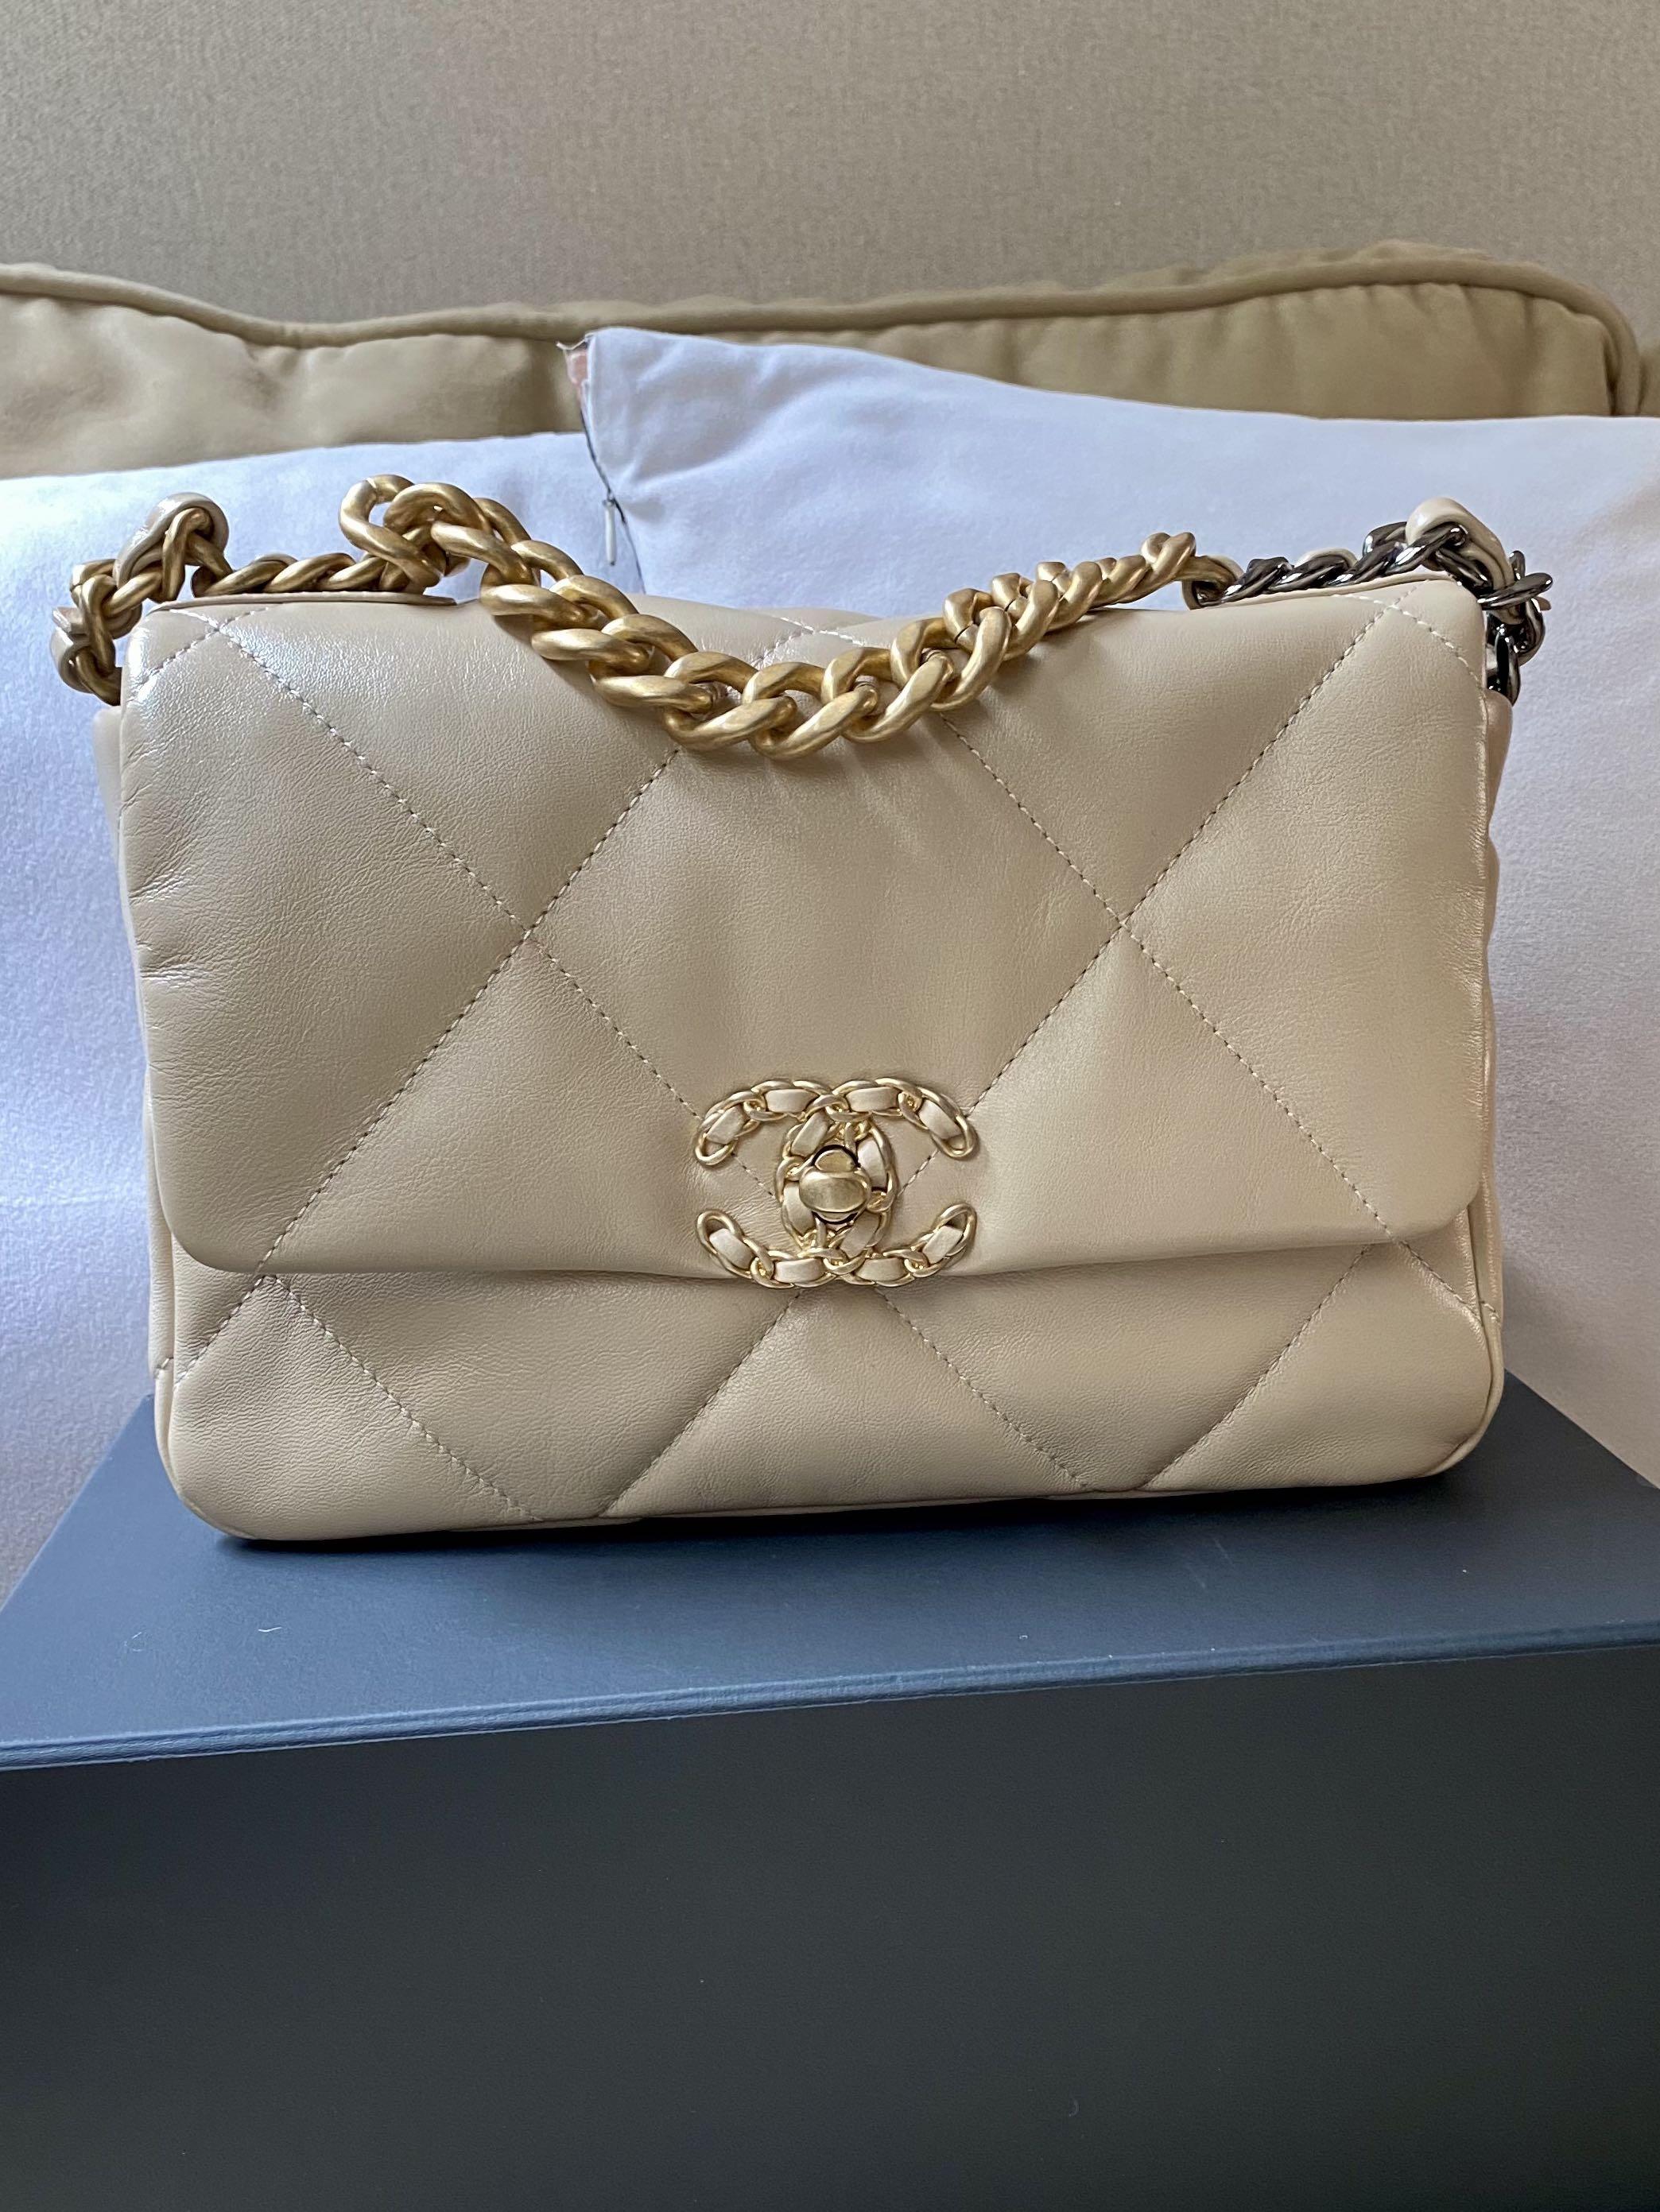 NEW CHANEL 19 SMALL 22S LIGHT BEIGE LAMBSKIN LEATHER CLASSIC FLAP BAG GOLD  NUDE chain purse, Women's Fashion, Bags & Wallets, Cross-body Bags on  Carousell